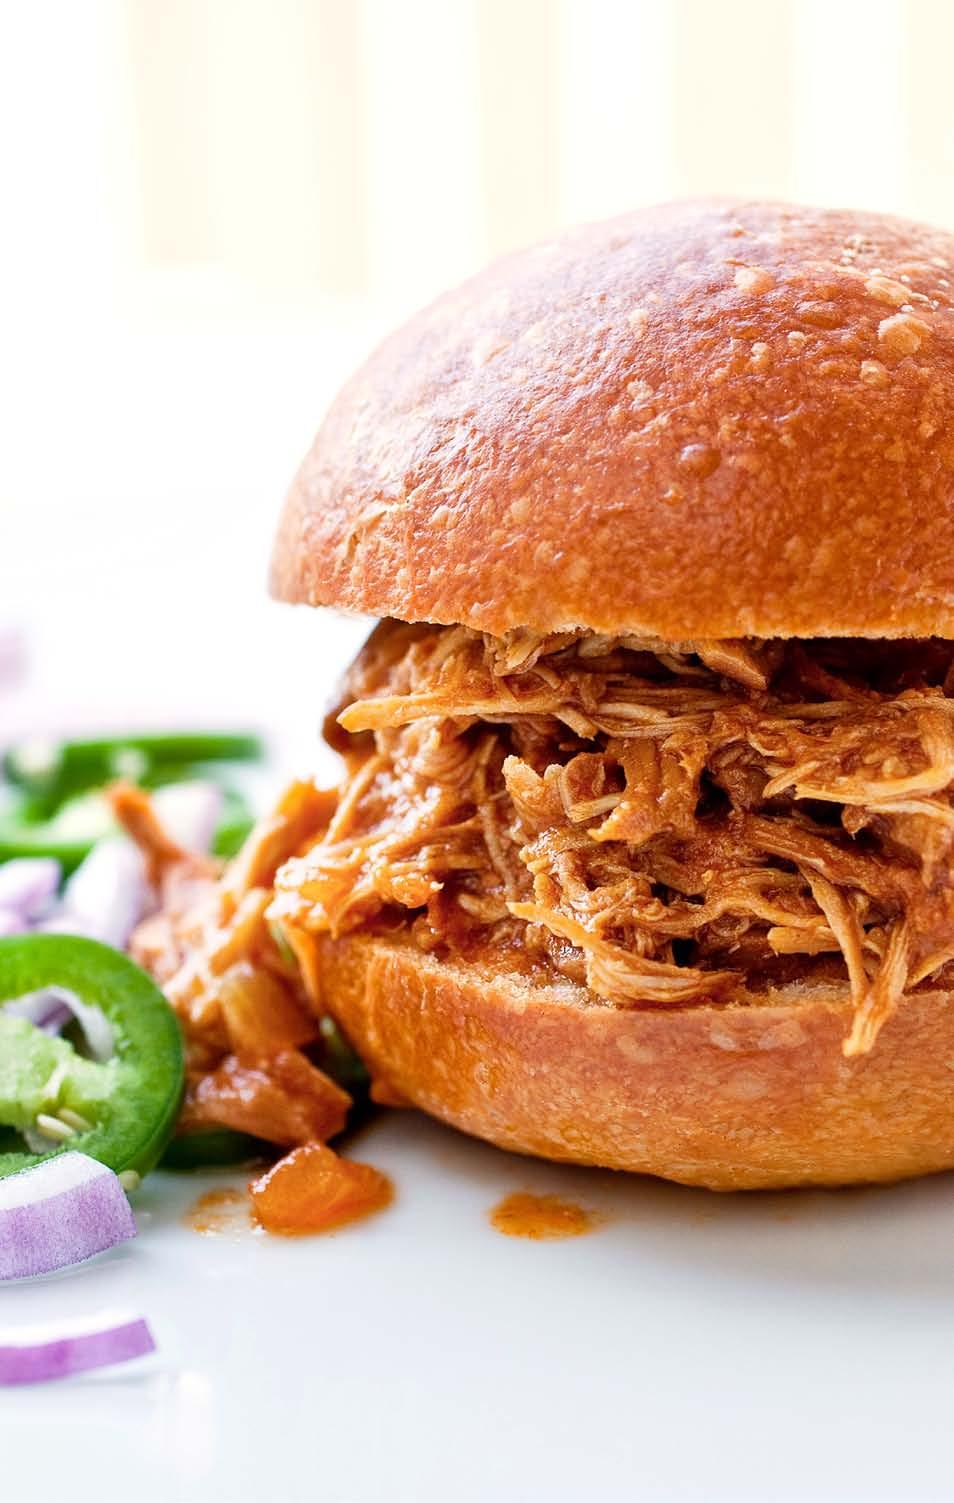 Barbecue Pulled Chicken Makes: 8 servings Active time: 25 minutes Total: 51/2 hours To make ahead: Cover and refrigerate for up to 3 days or freeze for up to 1 month.